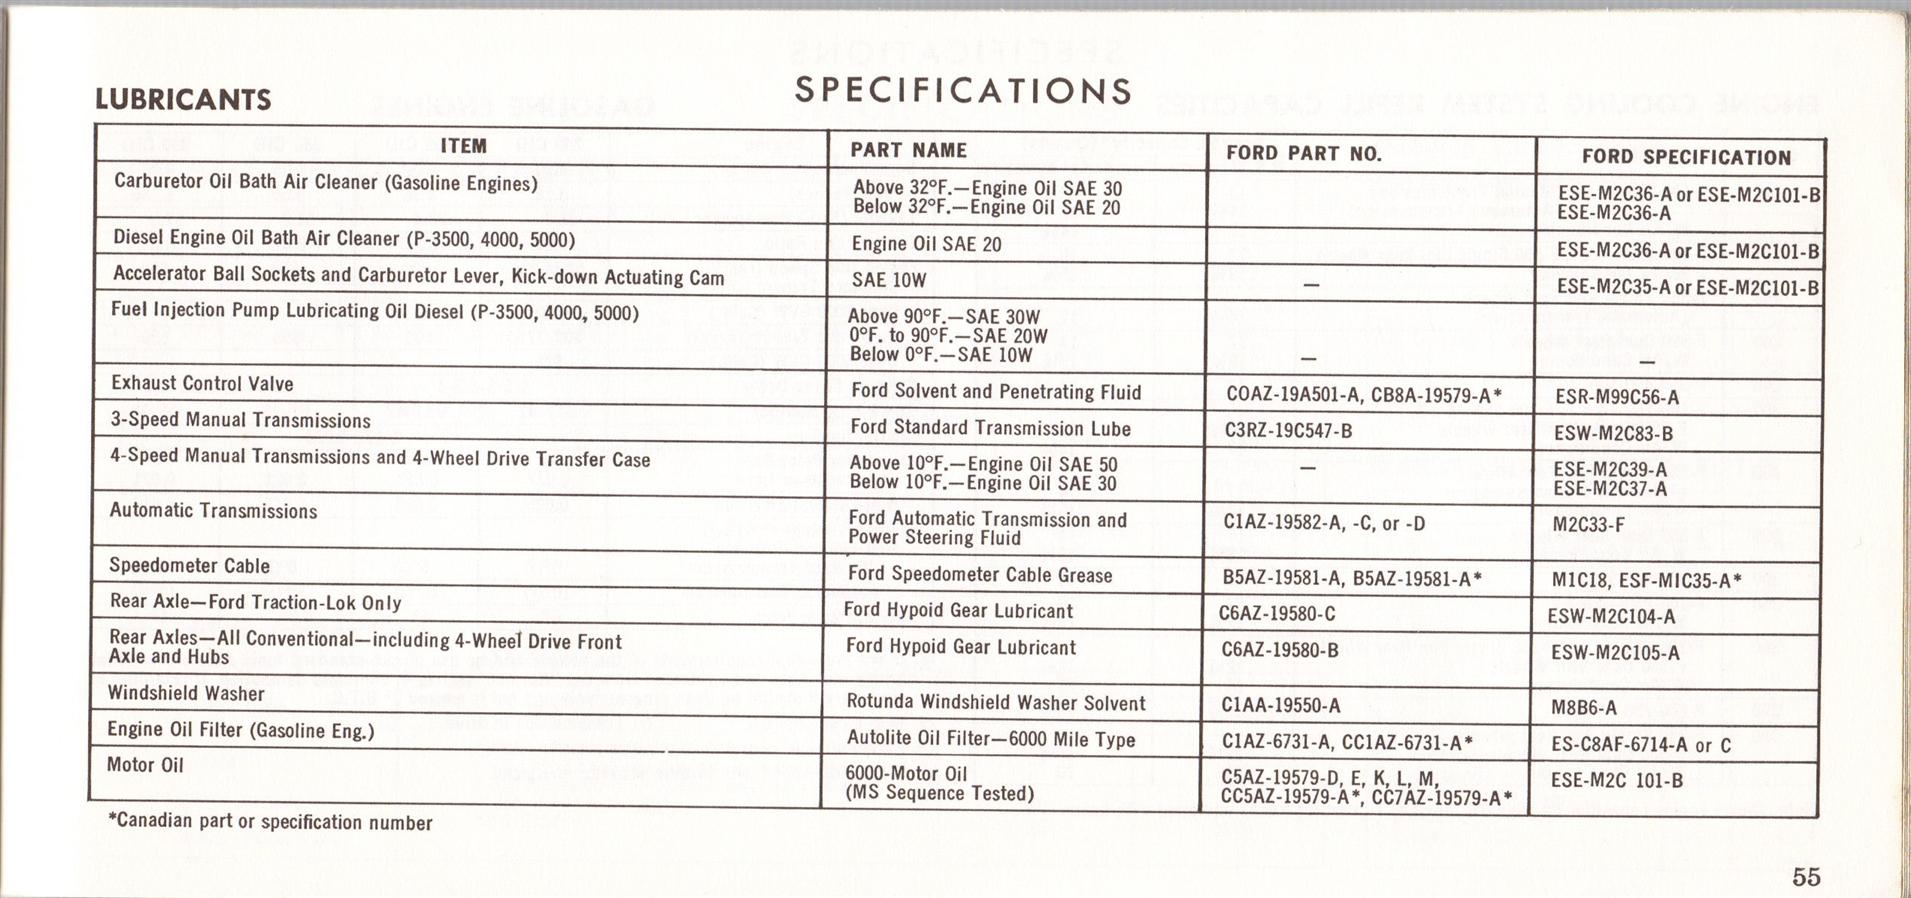 1969_Ford_Truck_Owners_Manual_Pg55